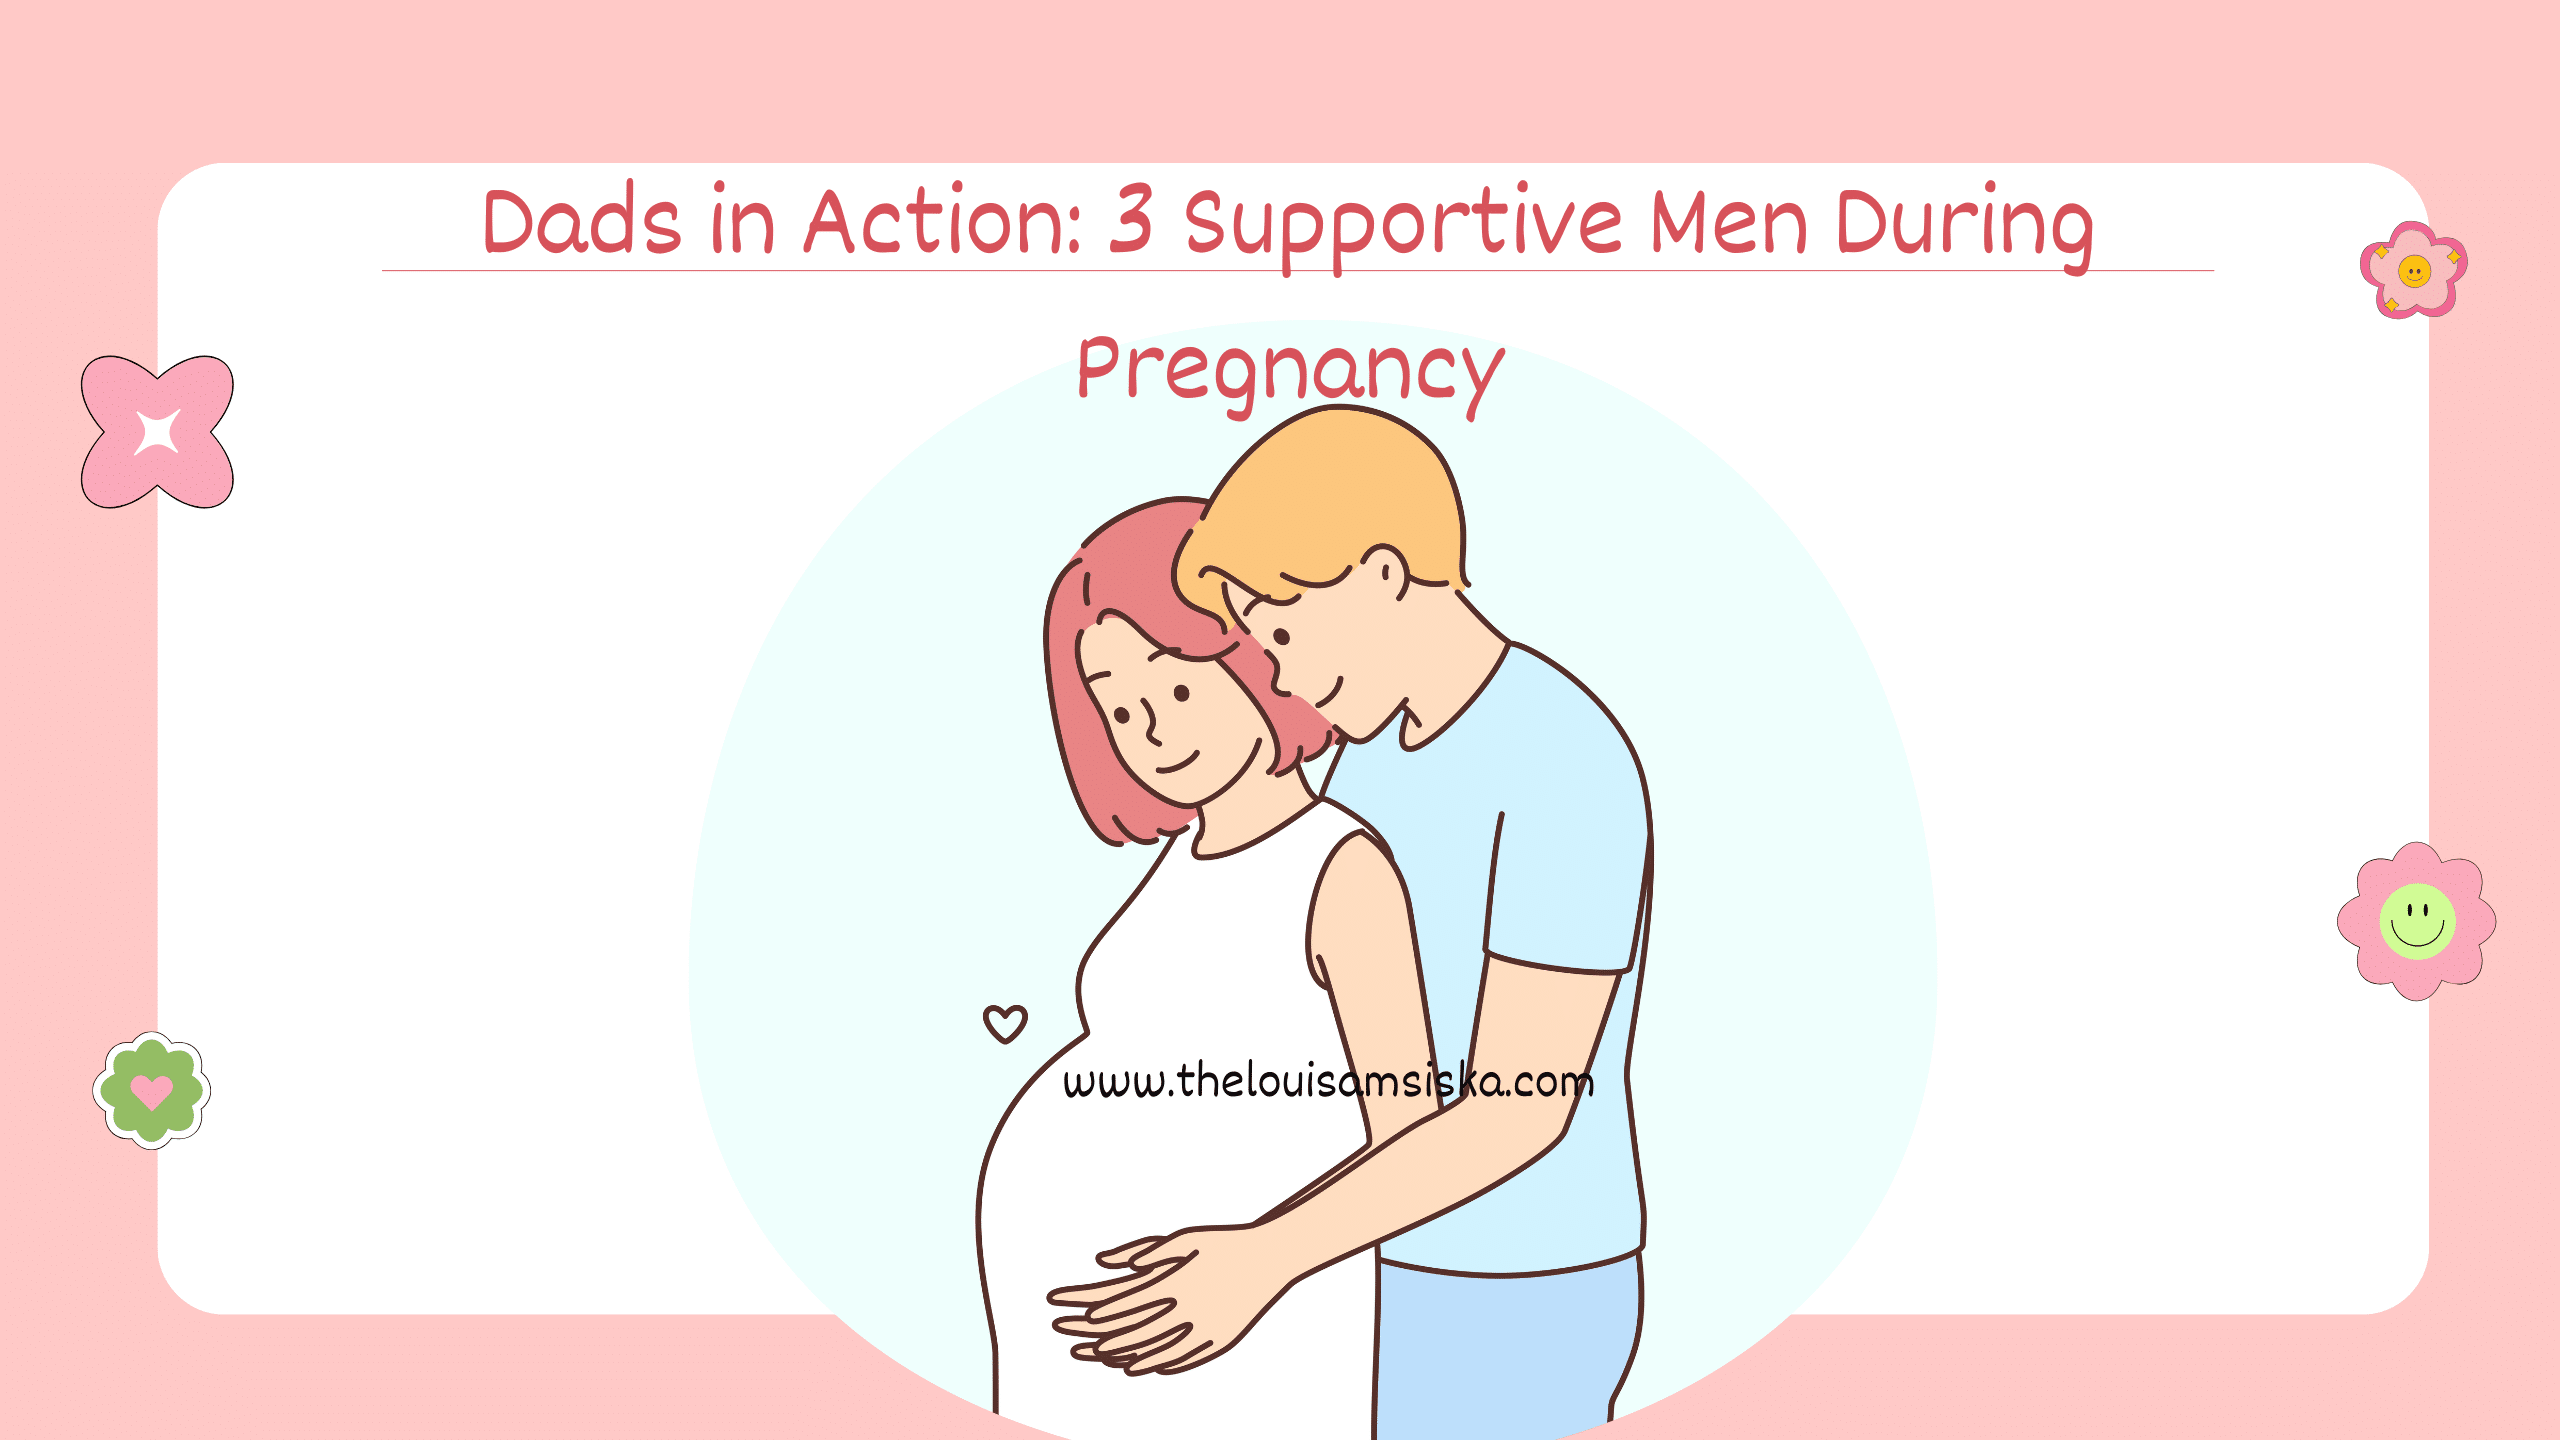 Supportive men during pregnancy